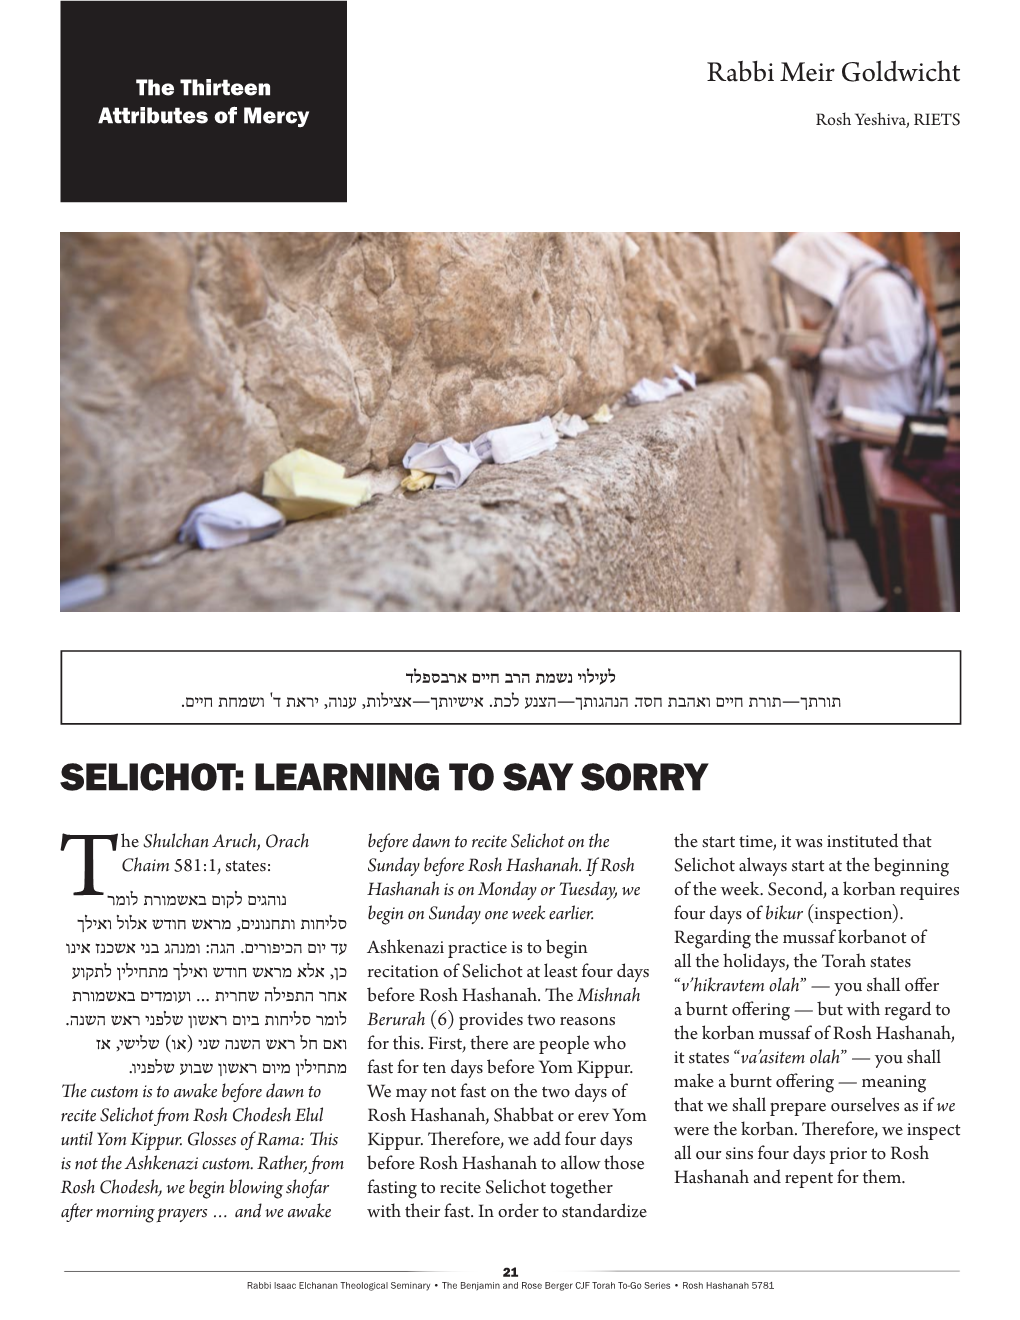 Selichot: Learning to Say Sorry